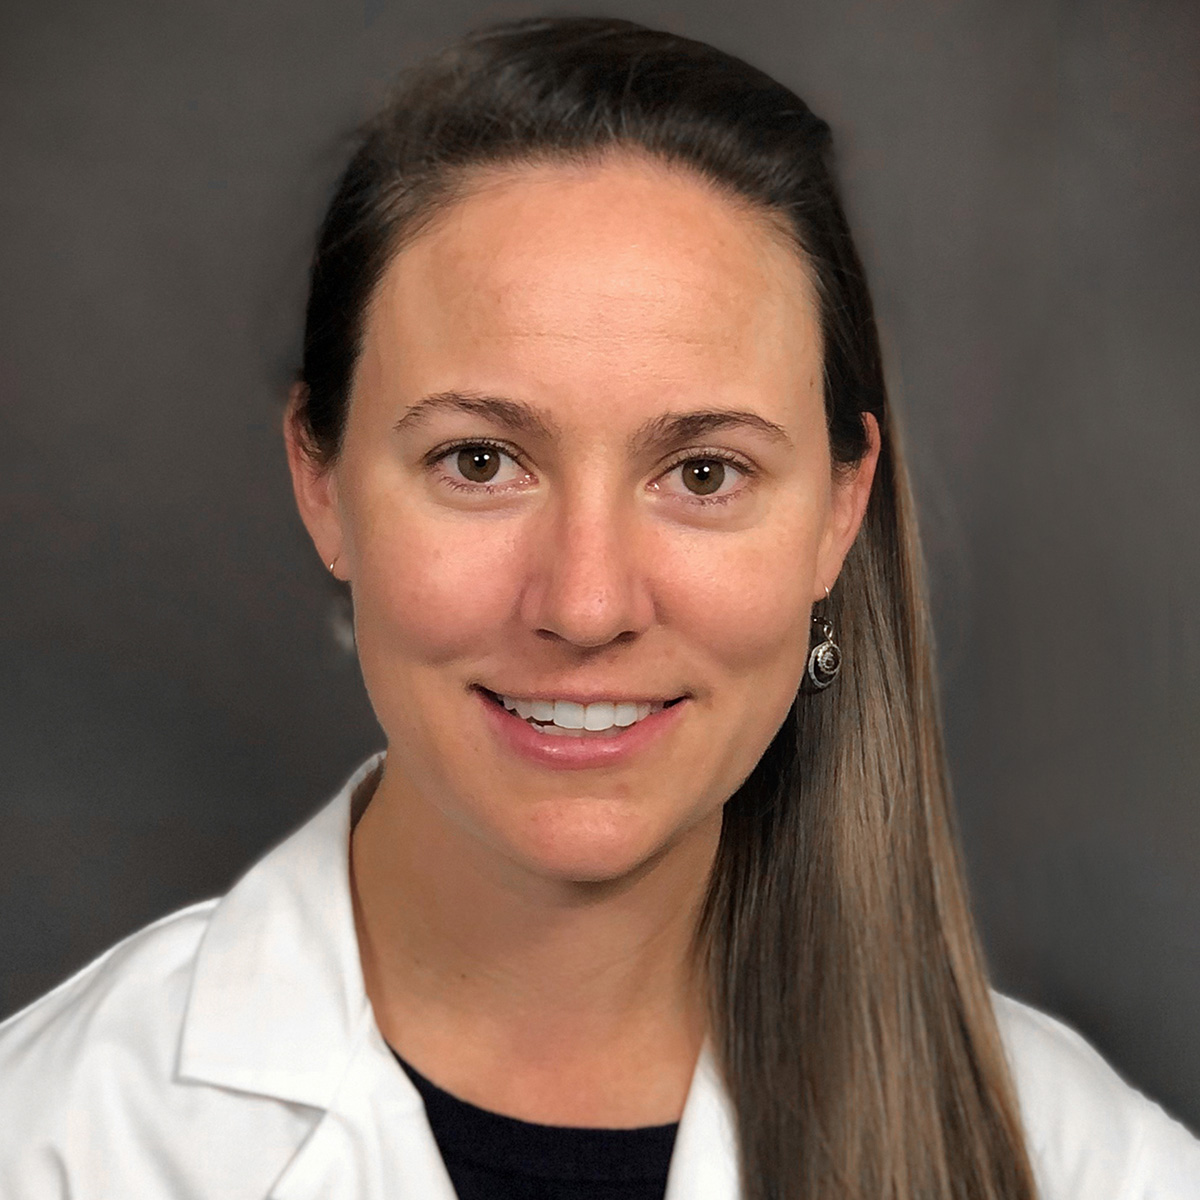 Dr. Hillary K. Anderson, MD